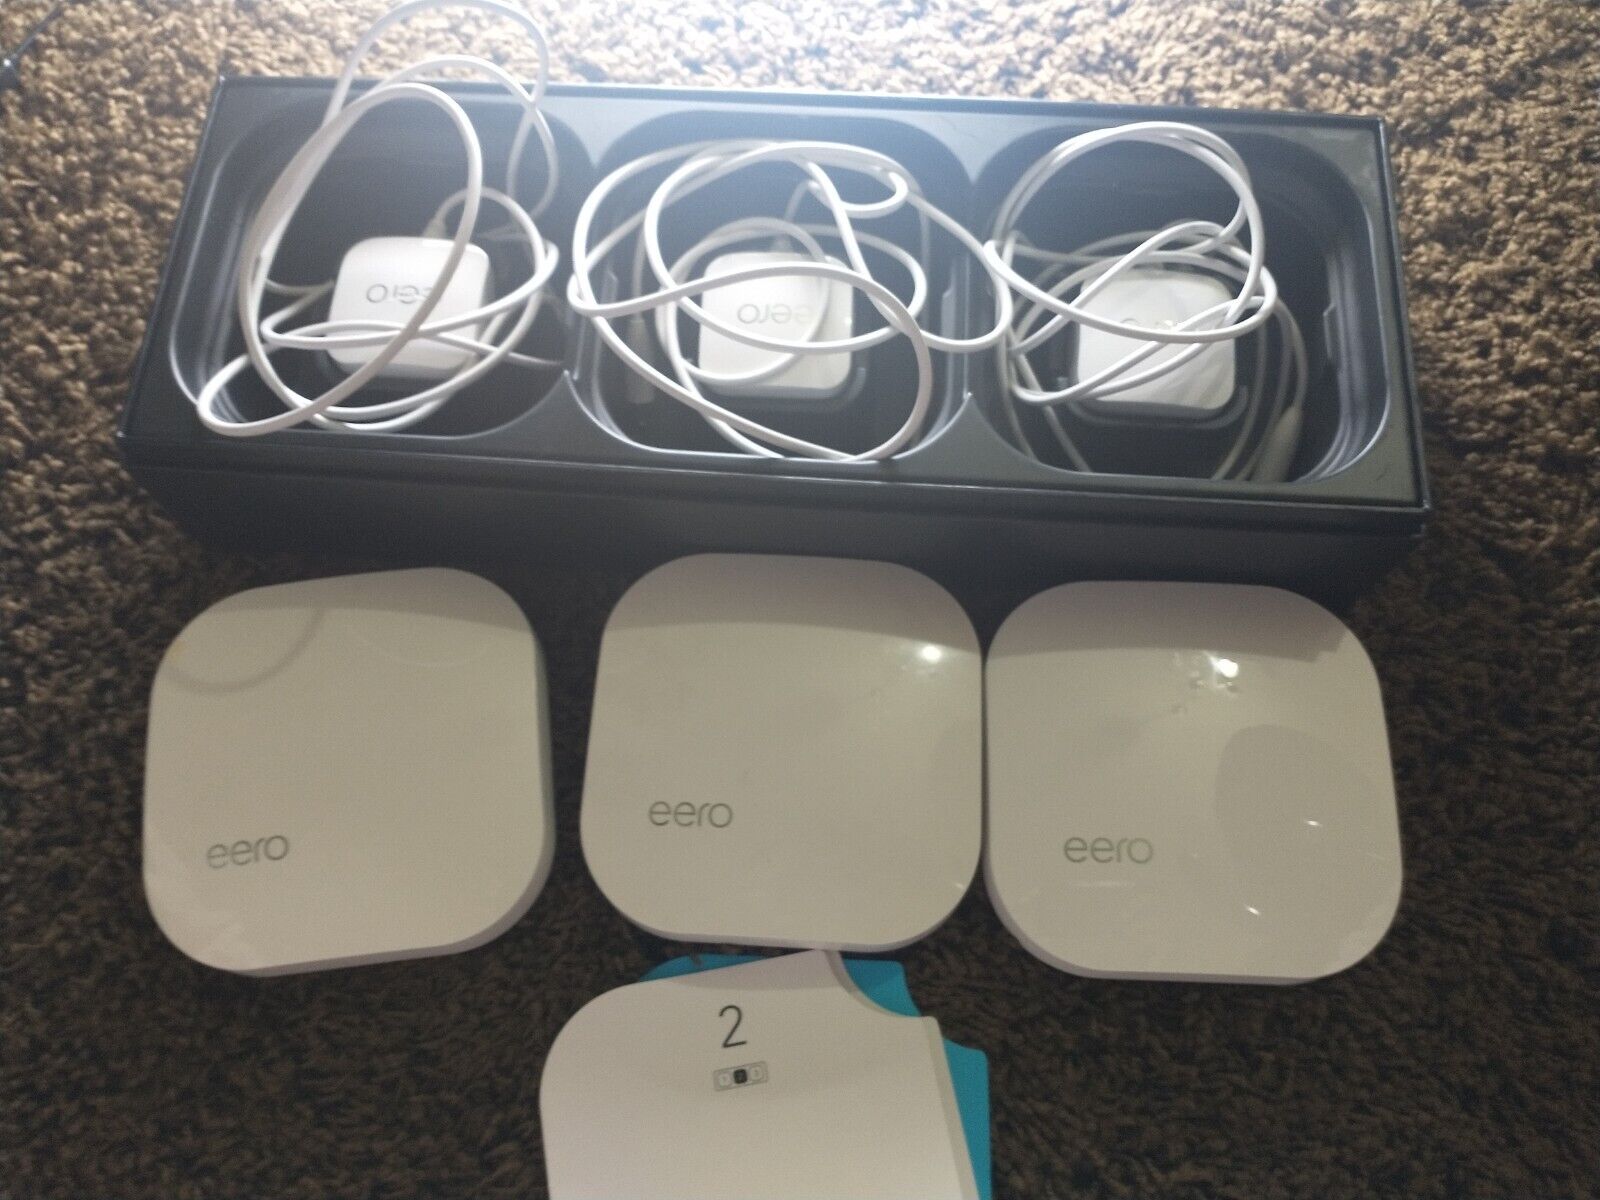 EERO 1st Gen Home WiFi System 3 Pack Model (A010001 Bundle with Power Supply